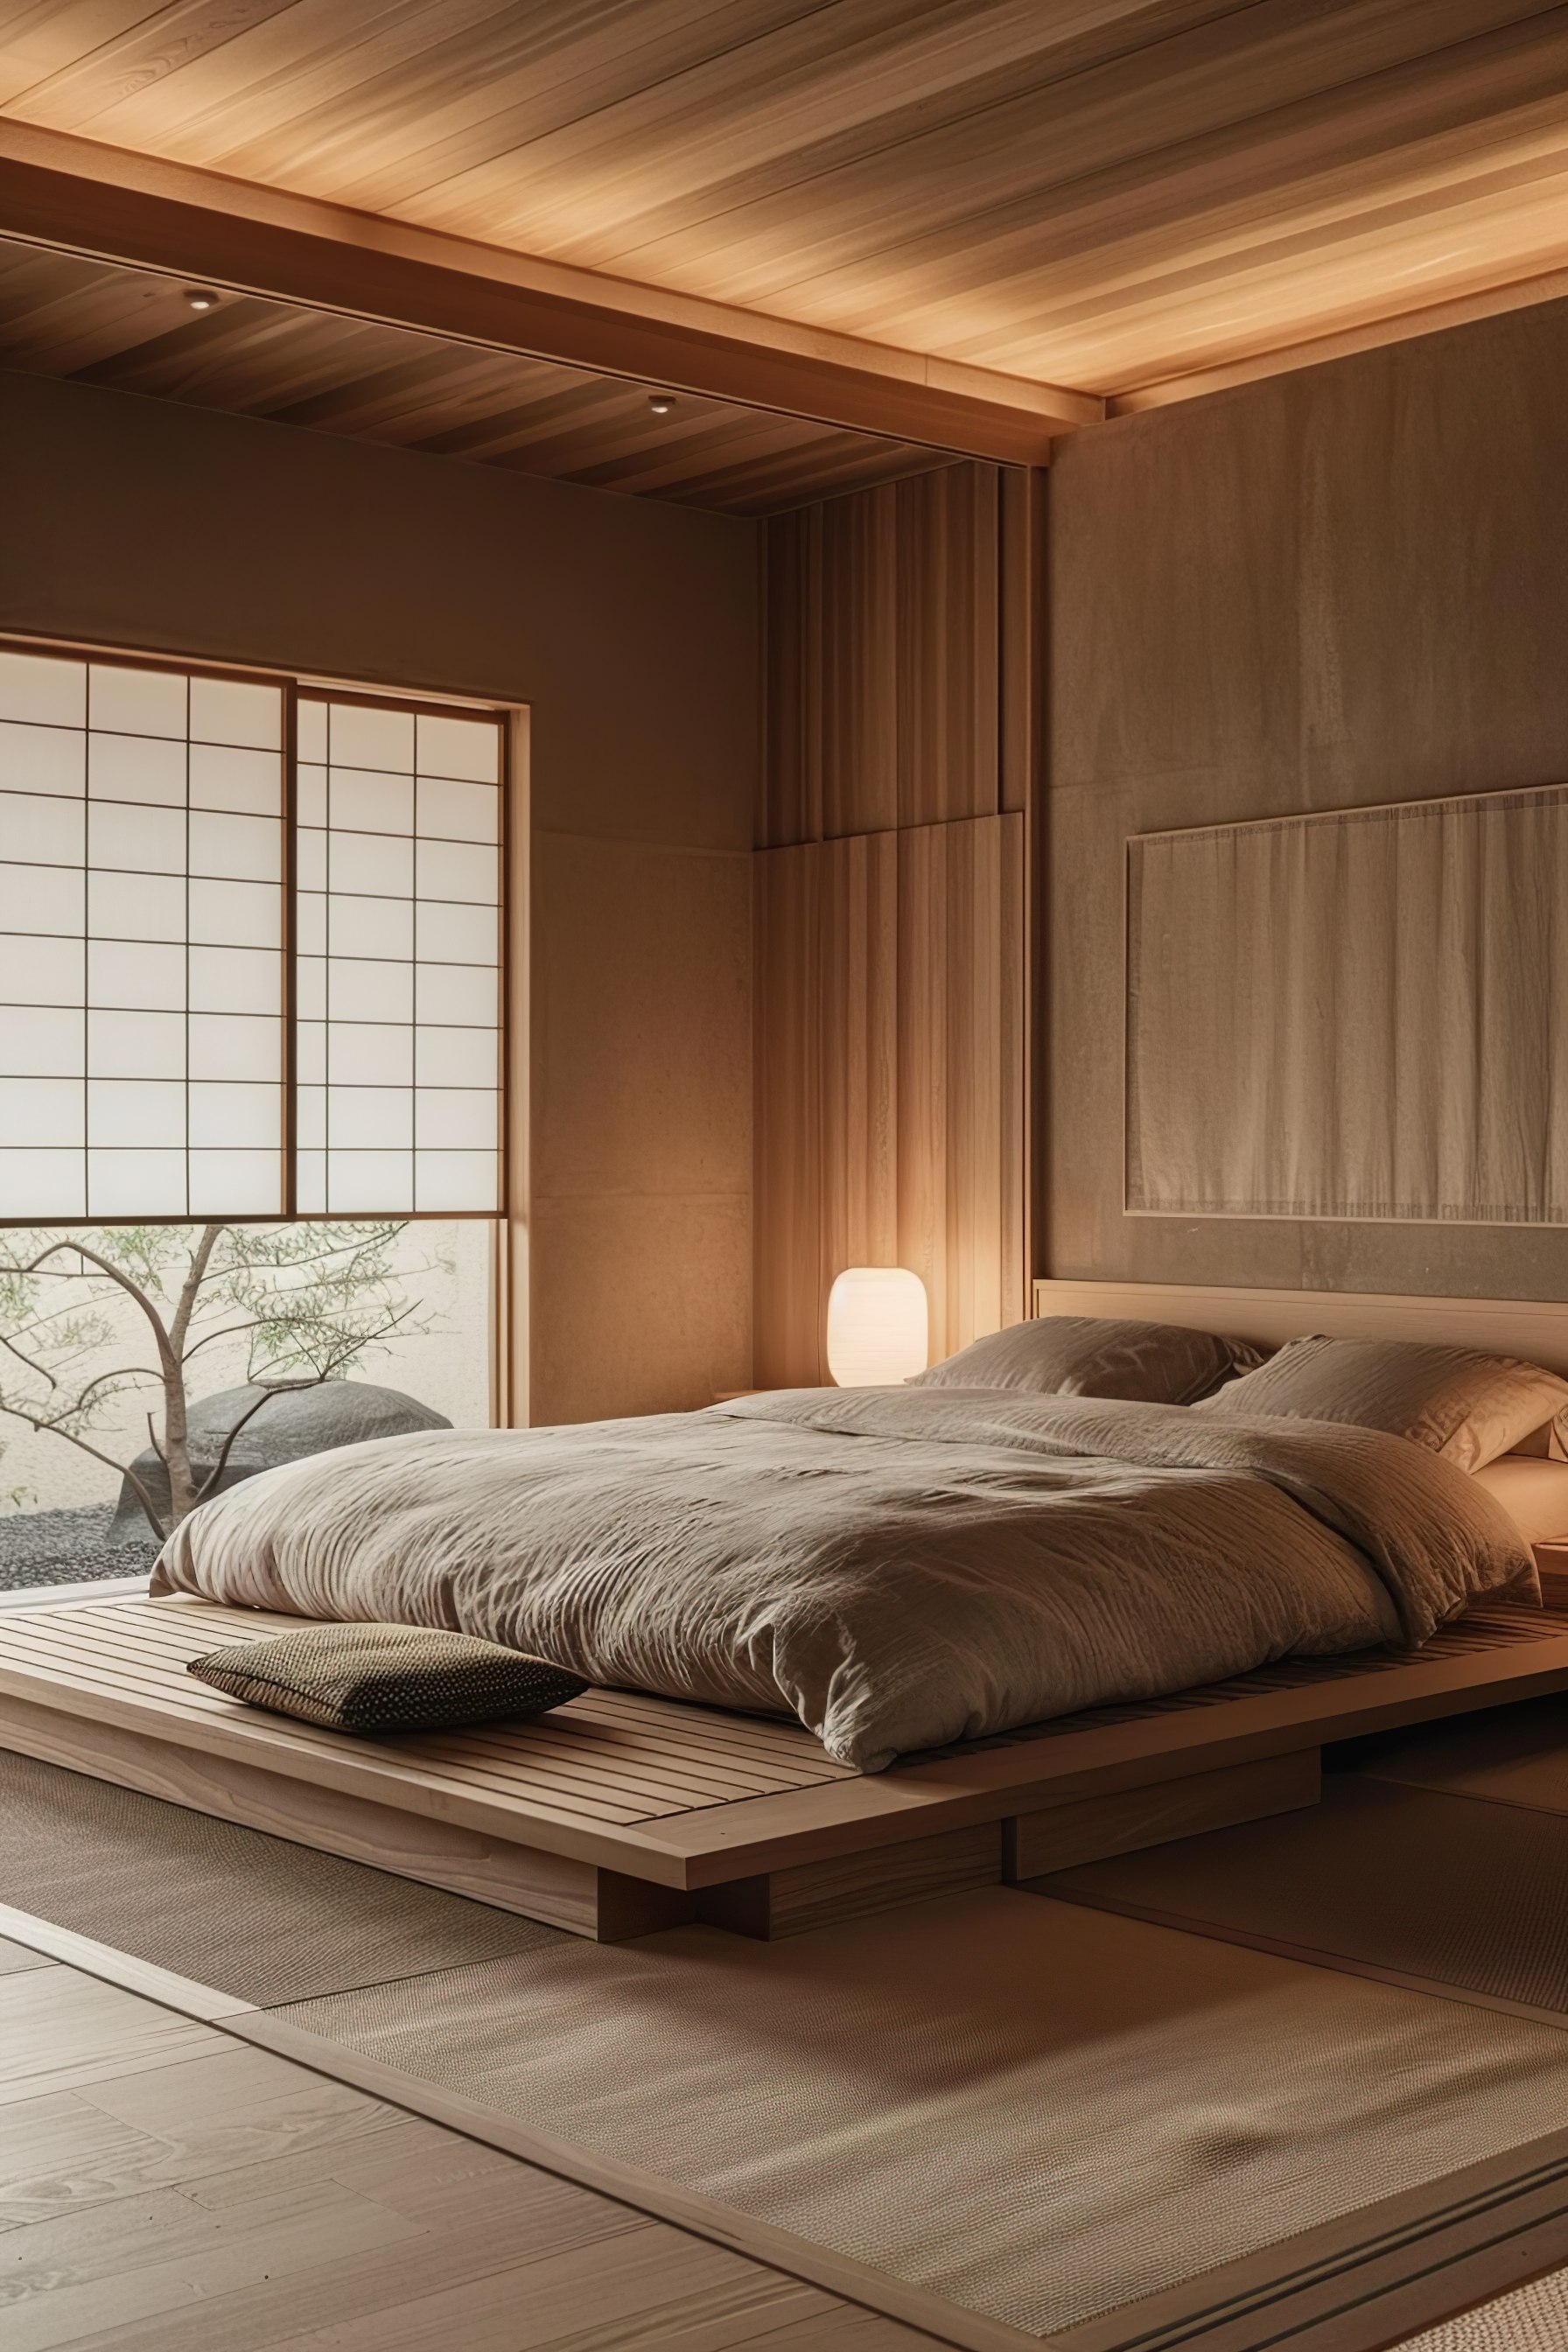 ALT: A minimalist bedroom with a low wooden bed frame, beige bedding, a shoji screen window, and a serene view of a tree outside.